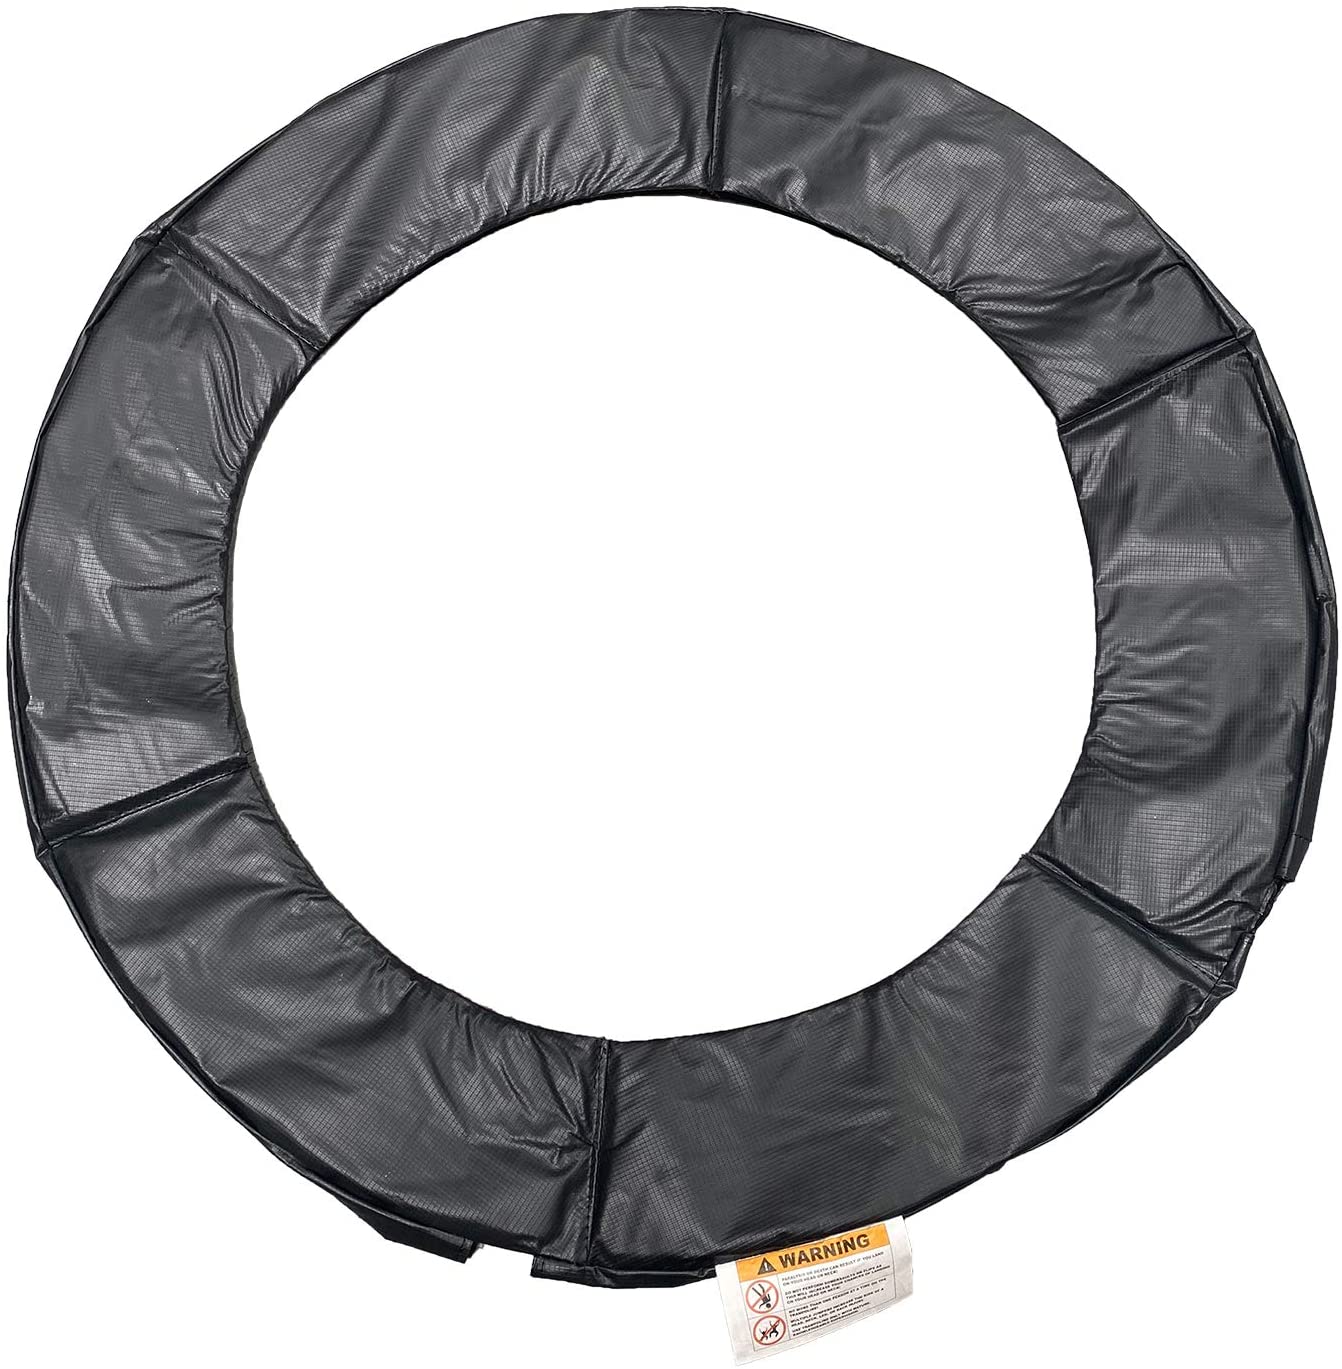 Trampoline Pads That You Can Buy [2022 Reviews]